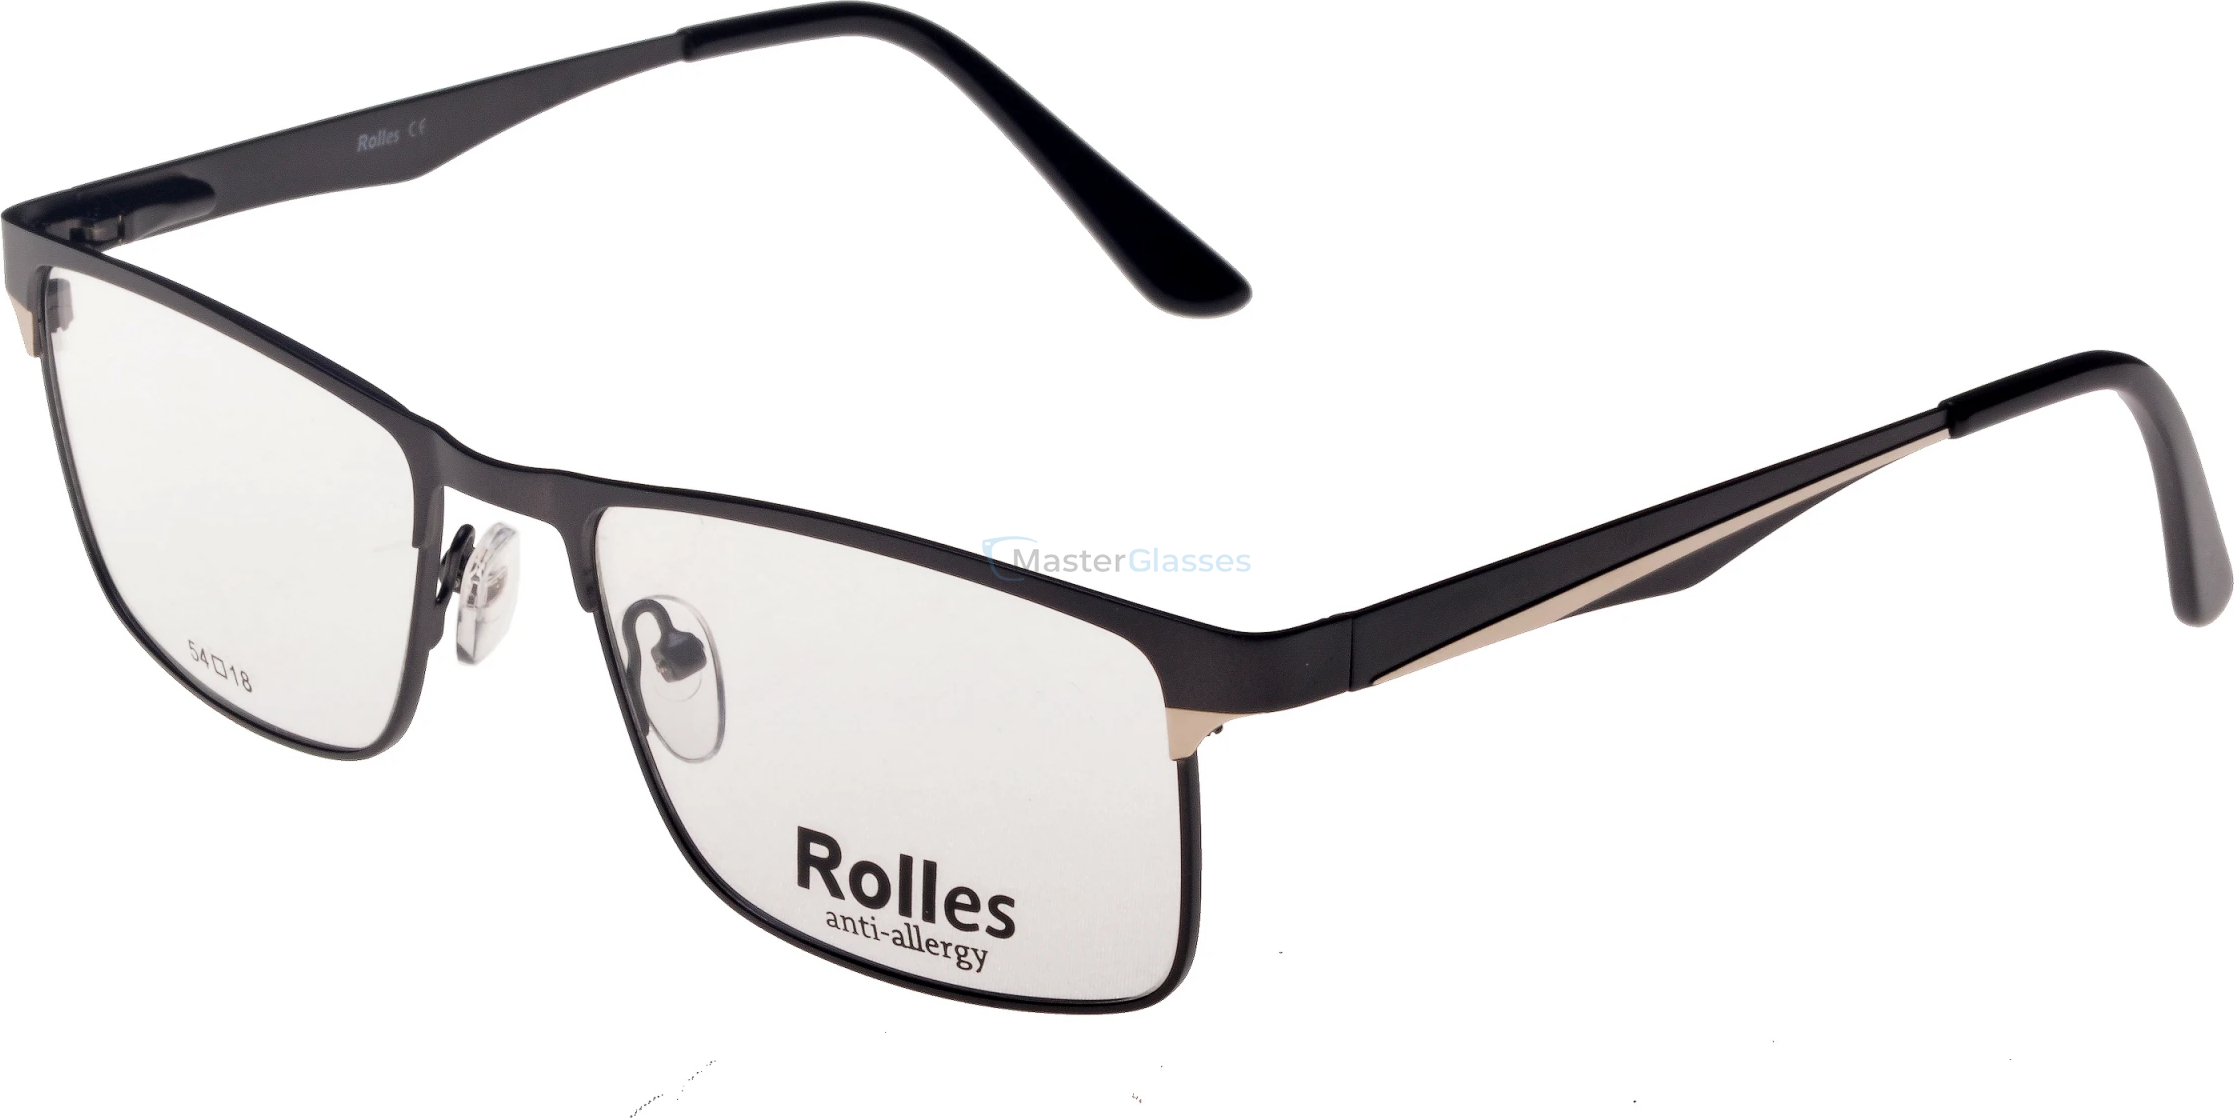  Rolles 602 01